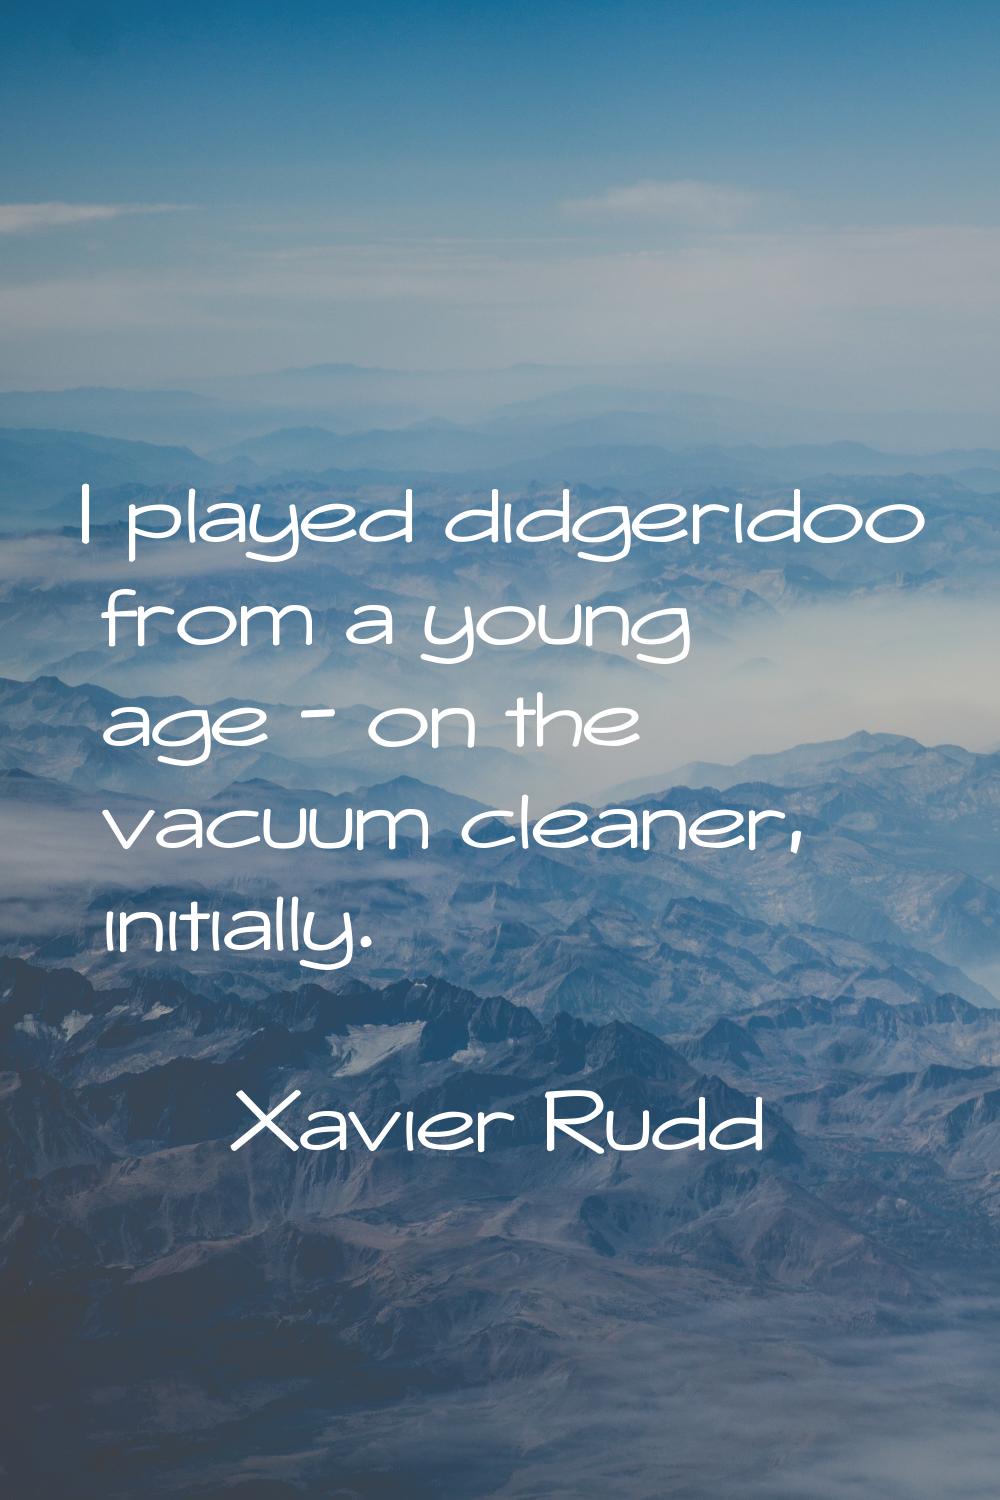 I played didgeridoo from a young age - on the vacuum cleaner, initially.